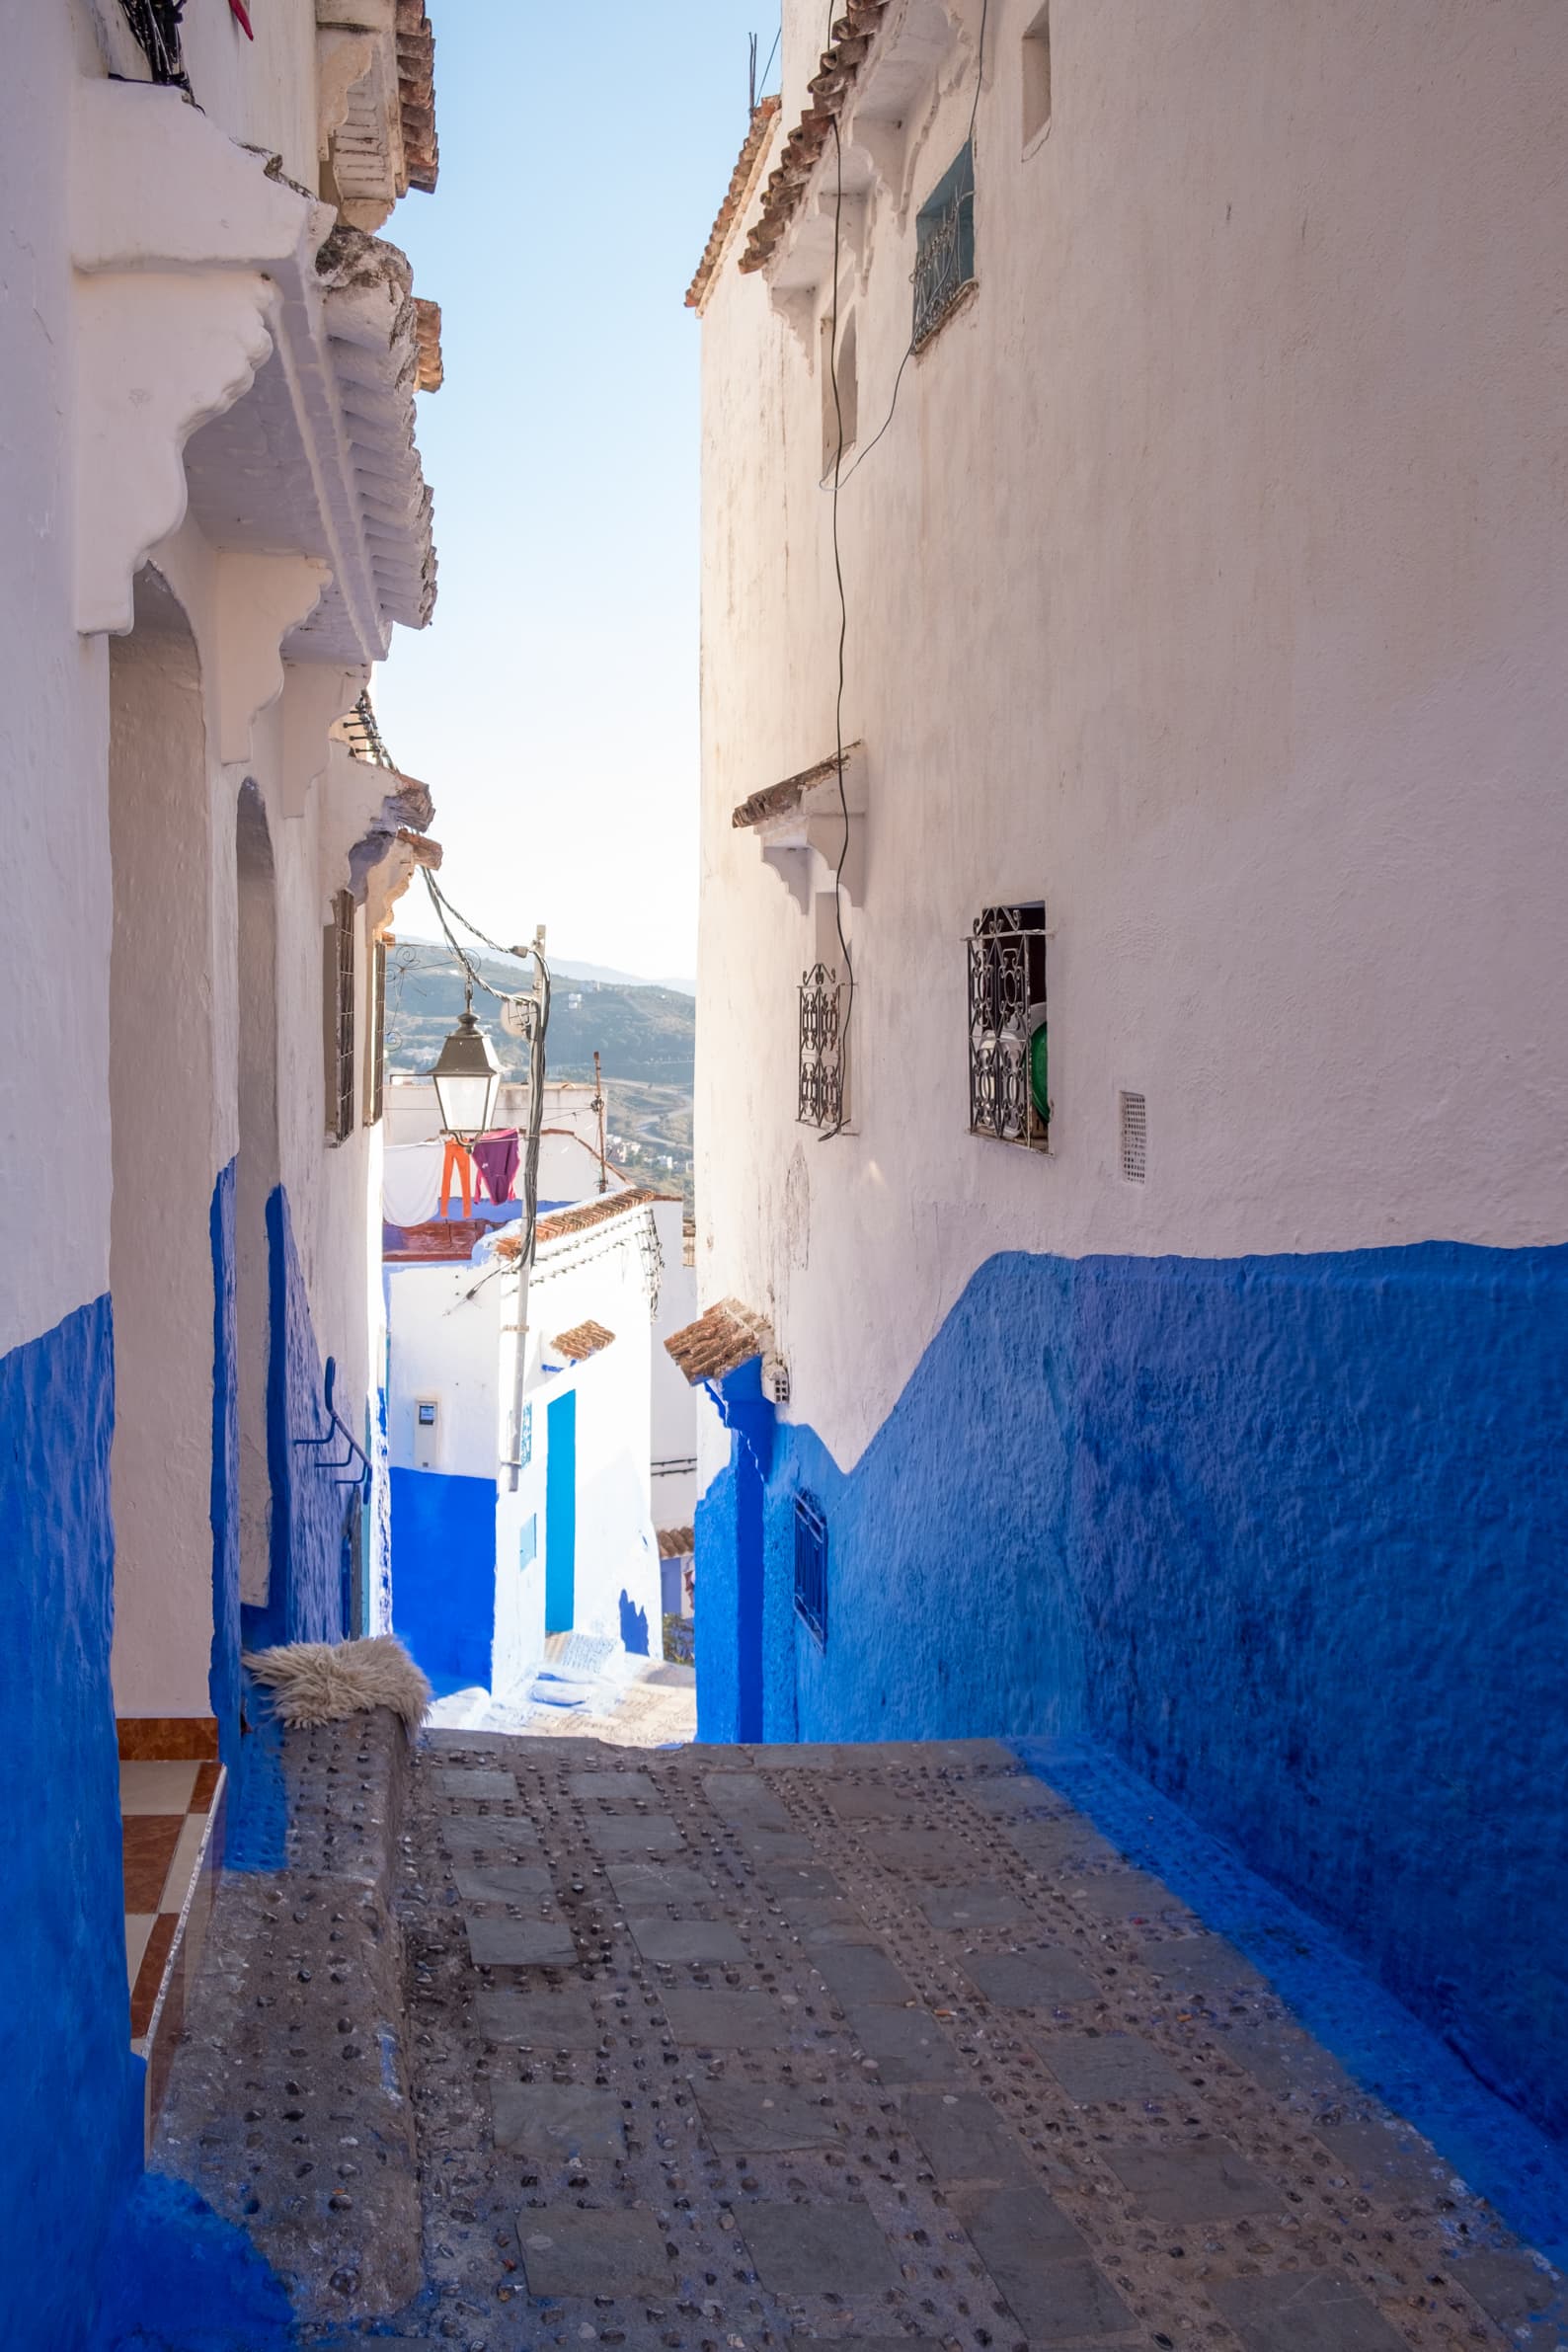 Freshly painted walls in Chefchaouen, Morocco